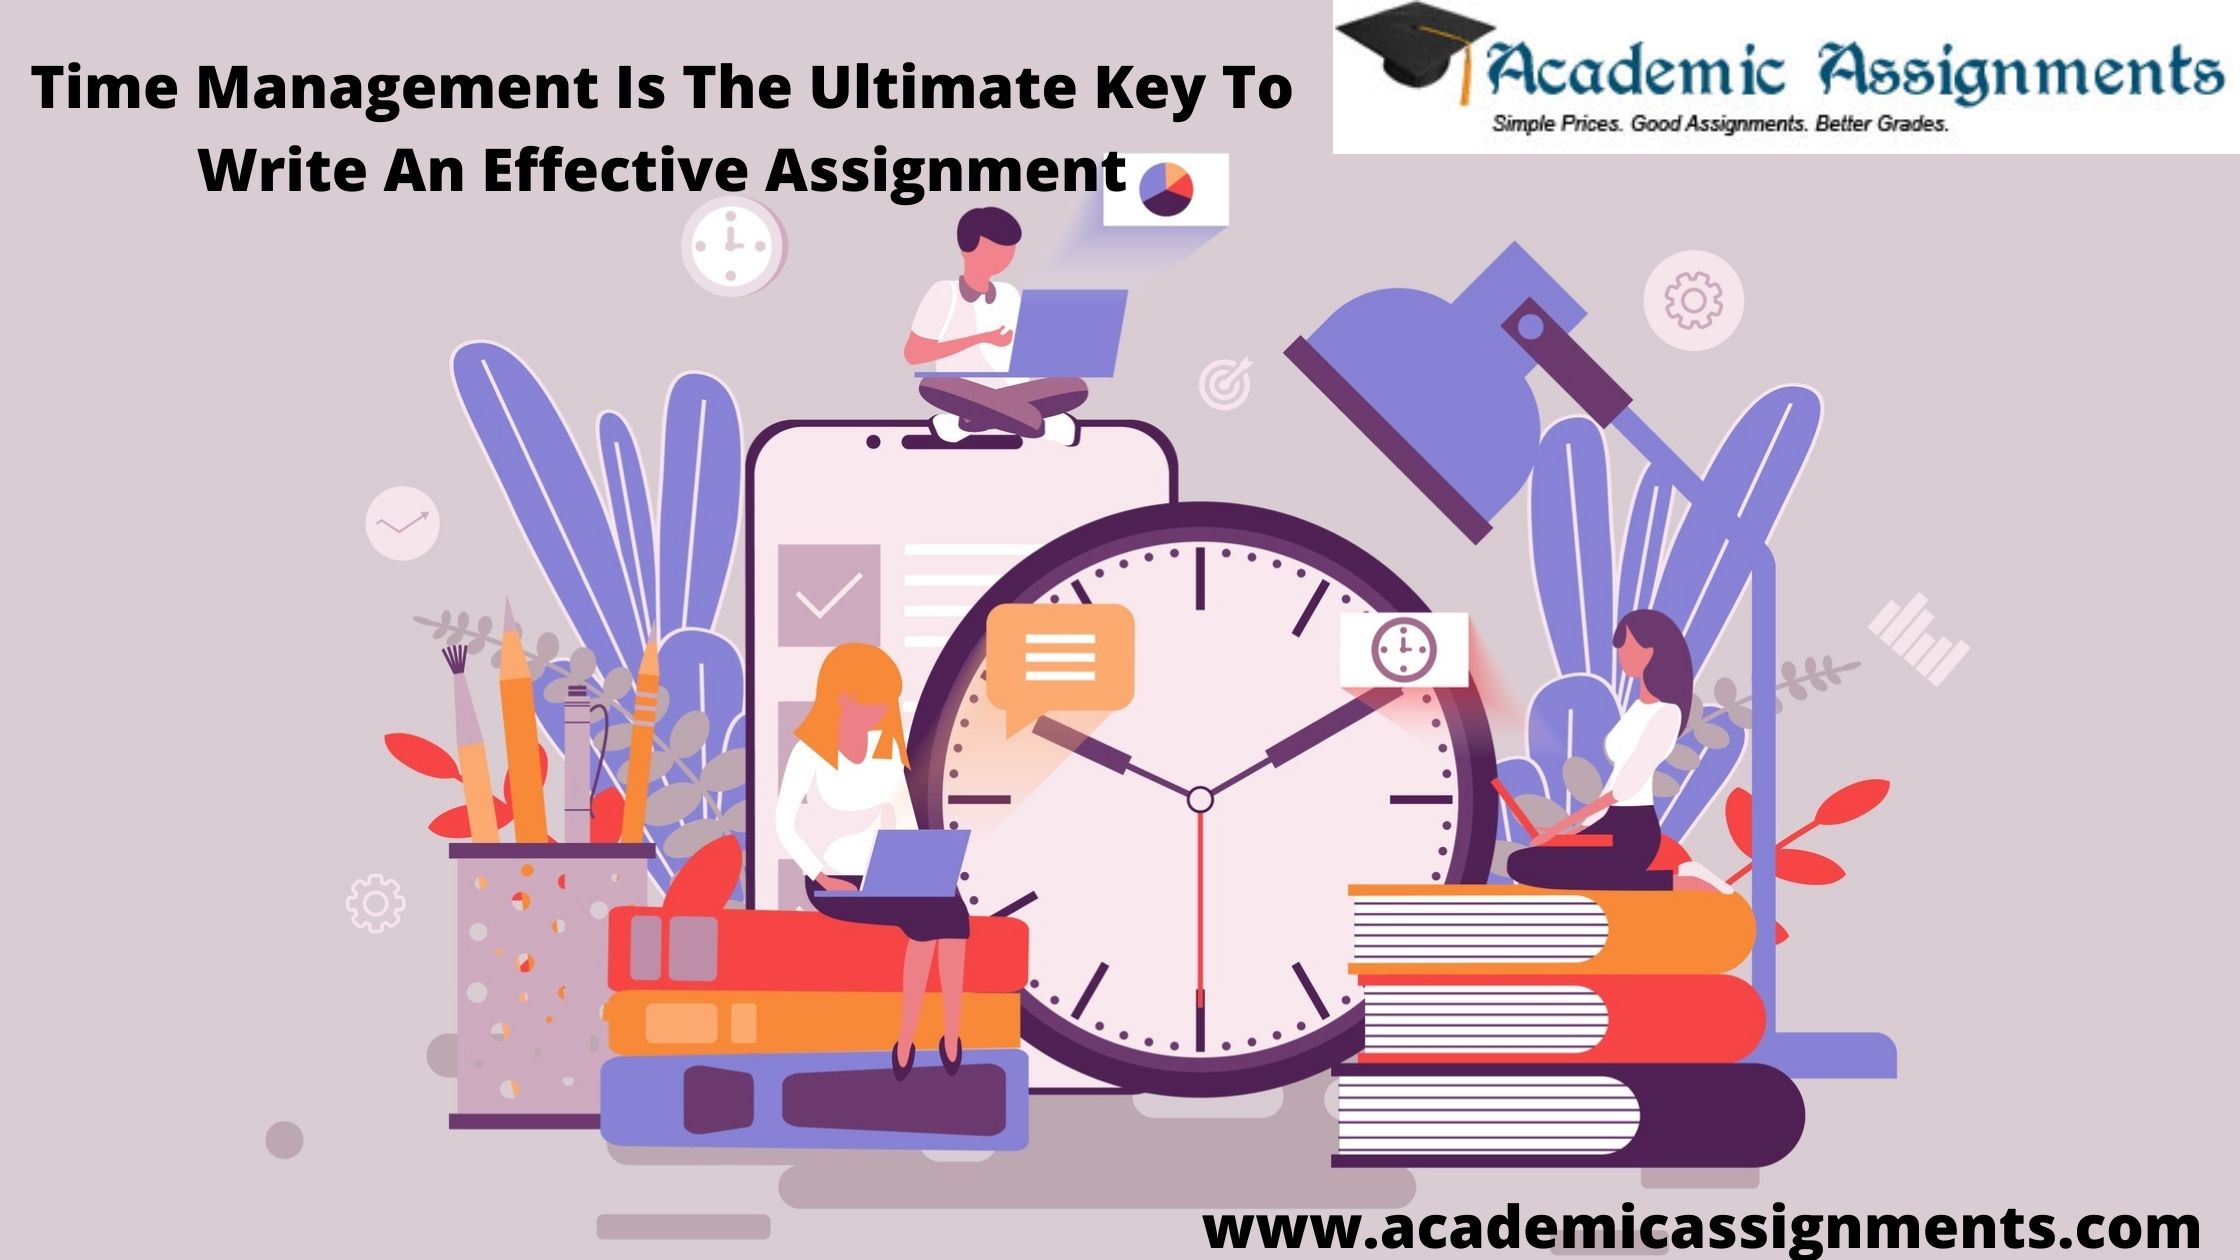 Time Management Is The Ultimate Key To Write An Effective Assignment